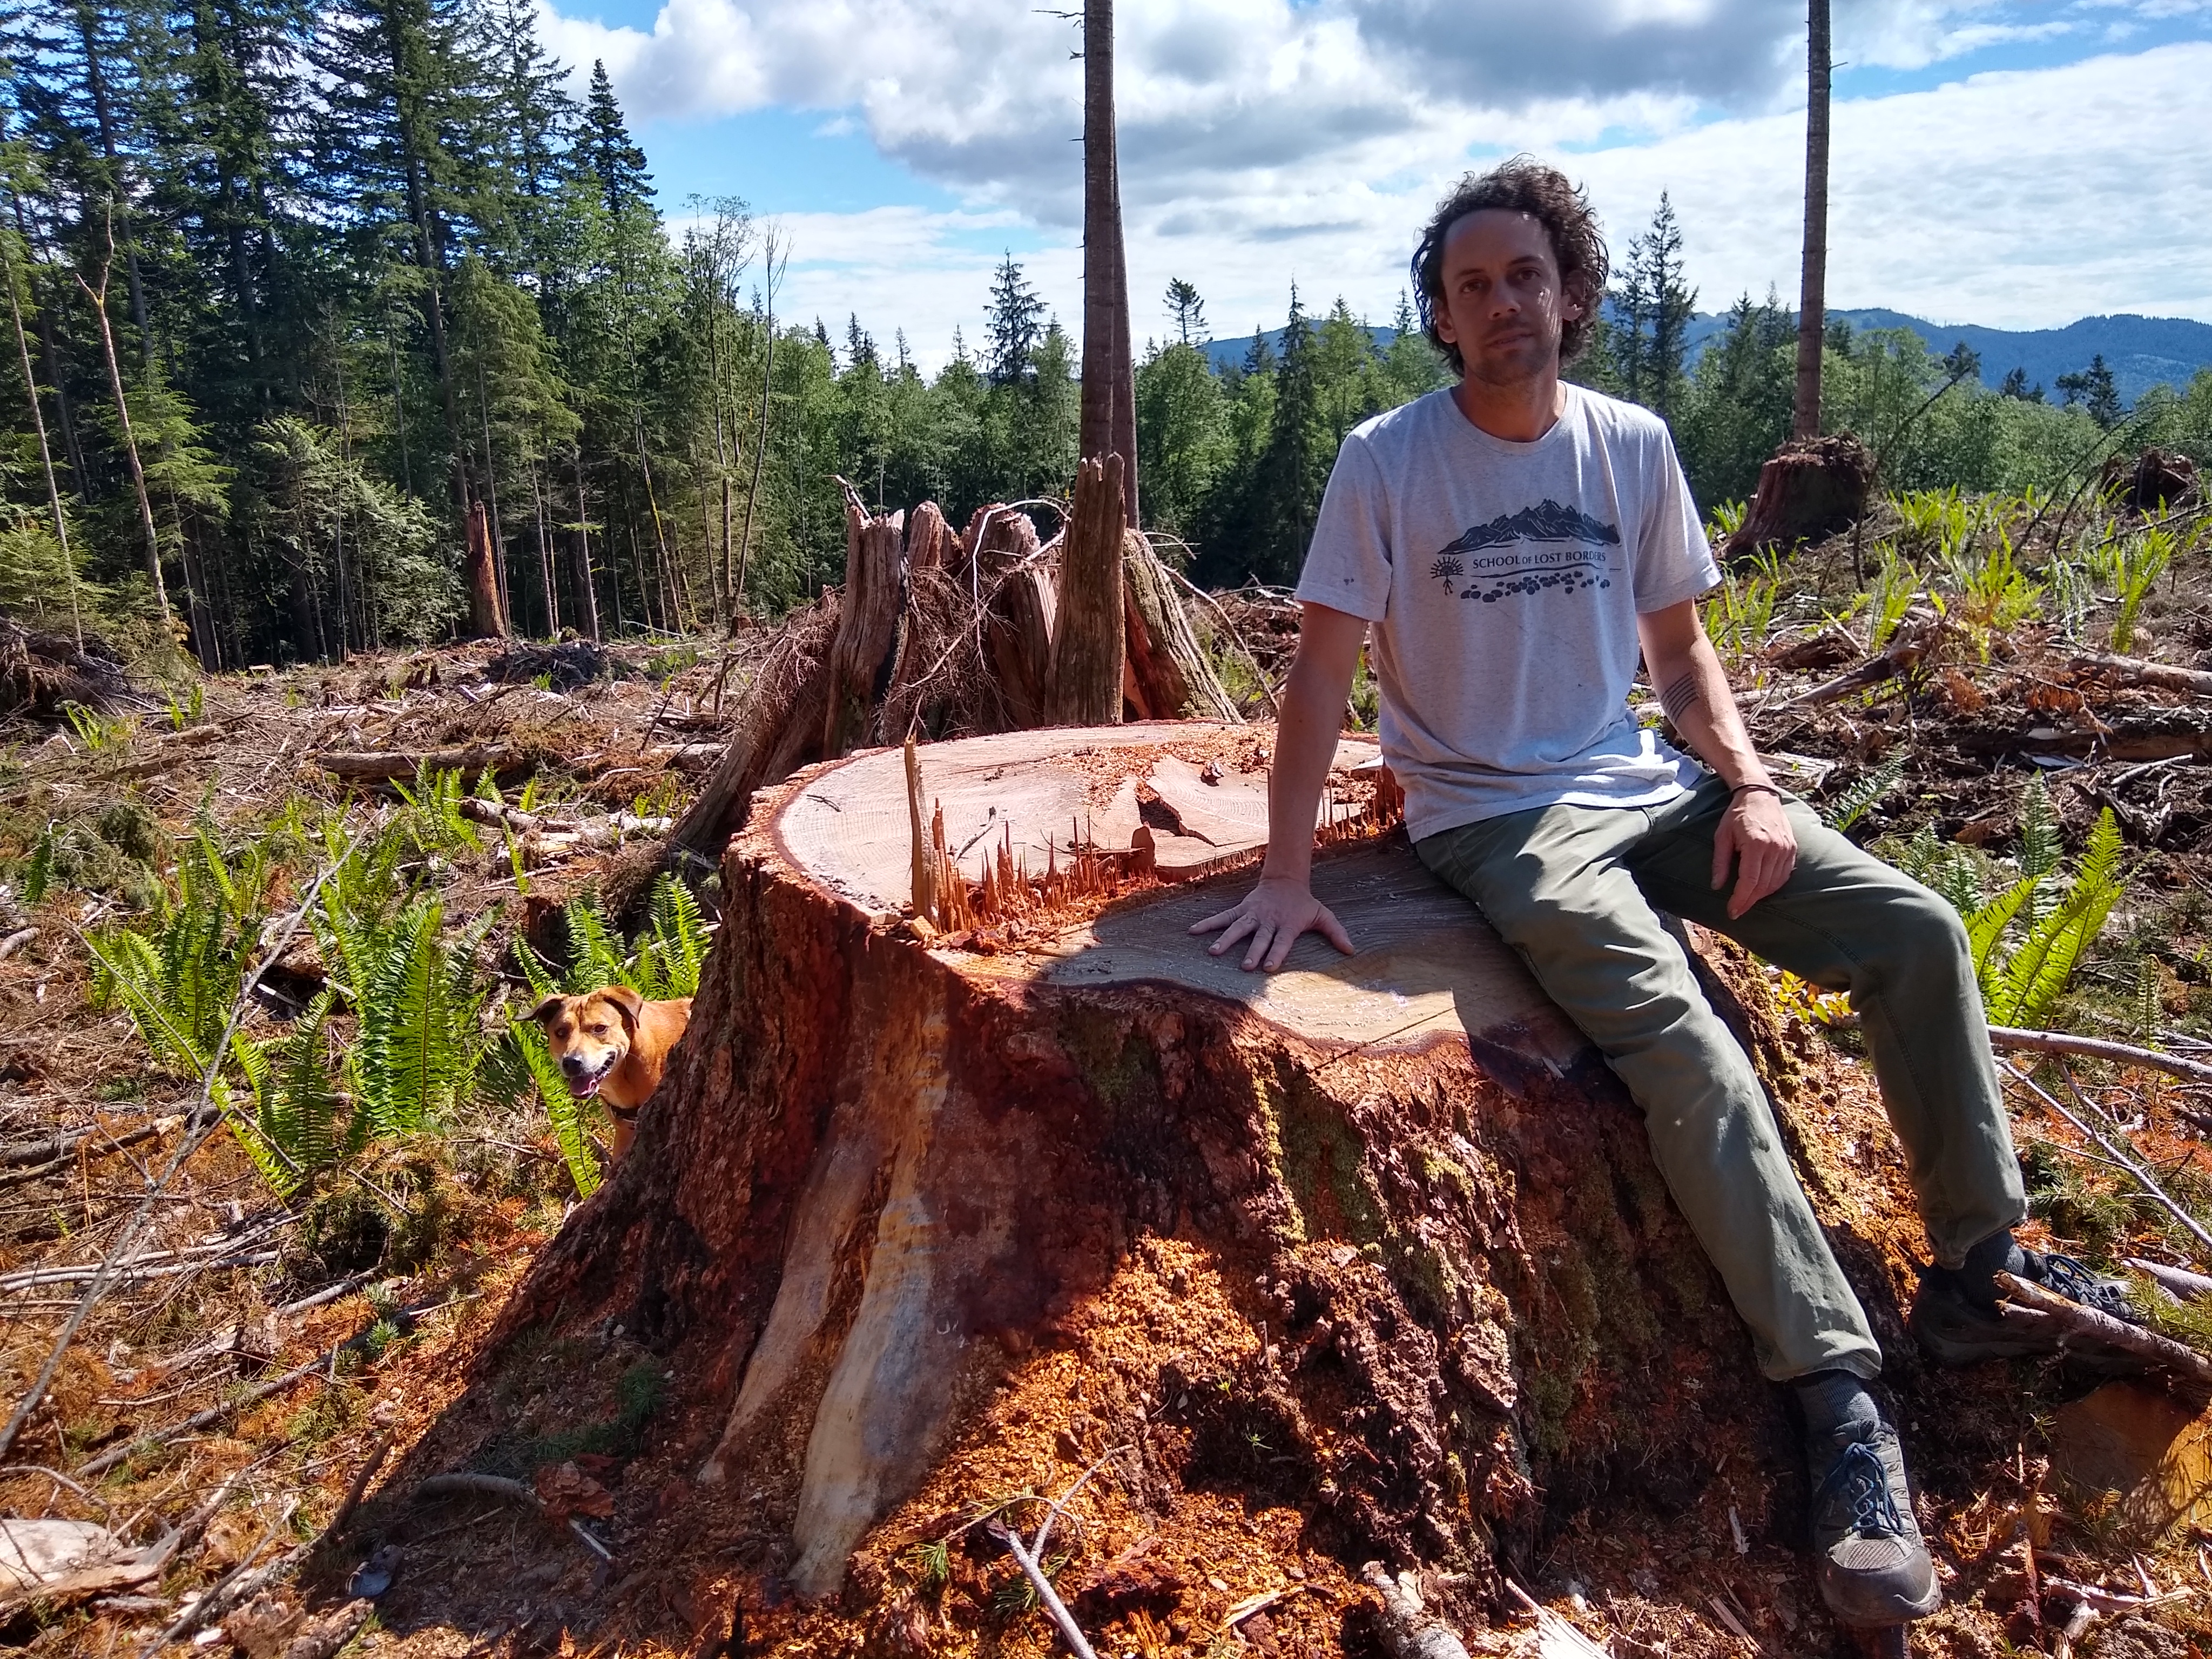 Brel leaning against a large stump to demonstrate the size of the cut down tree